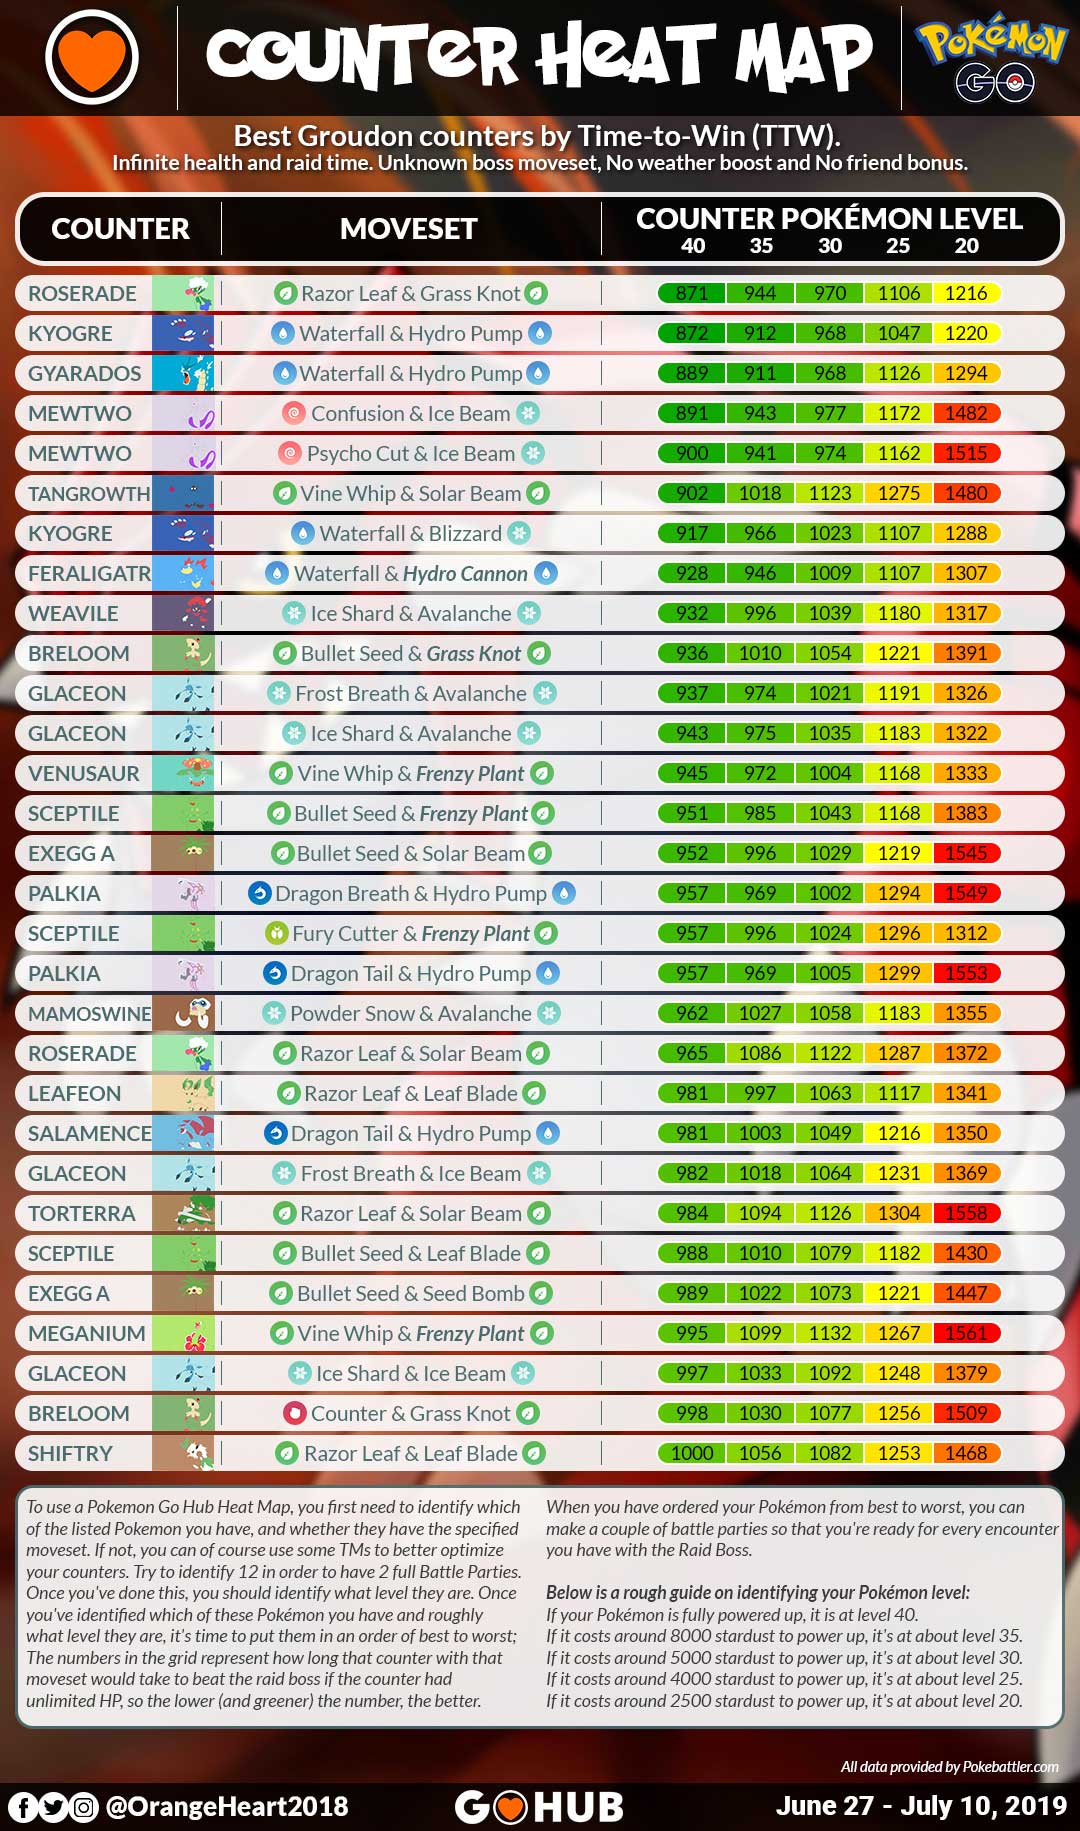 Groudon Heat Map - infographic showing the best Groudon counters ordered by species, moveset, level and TTW